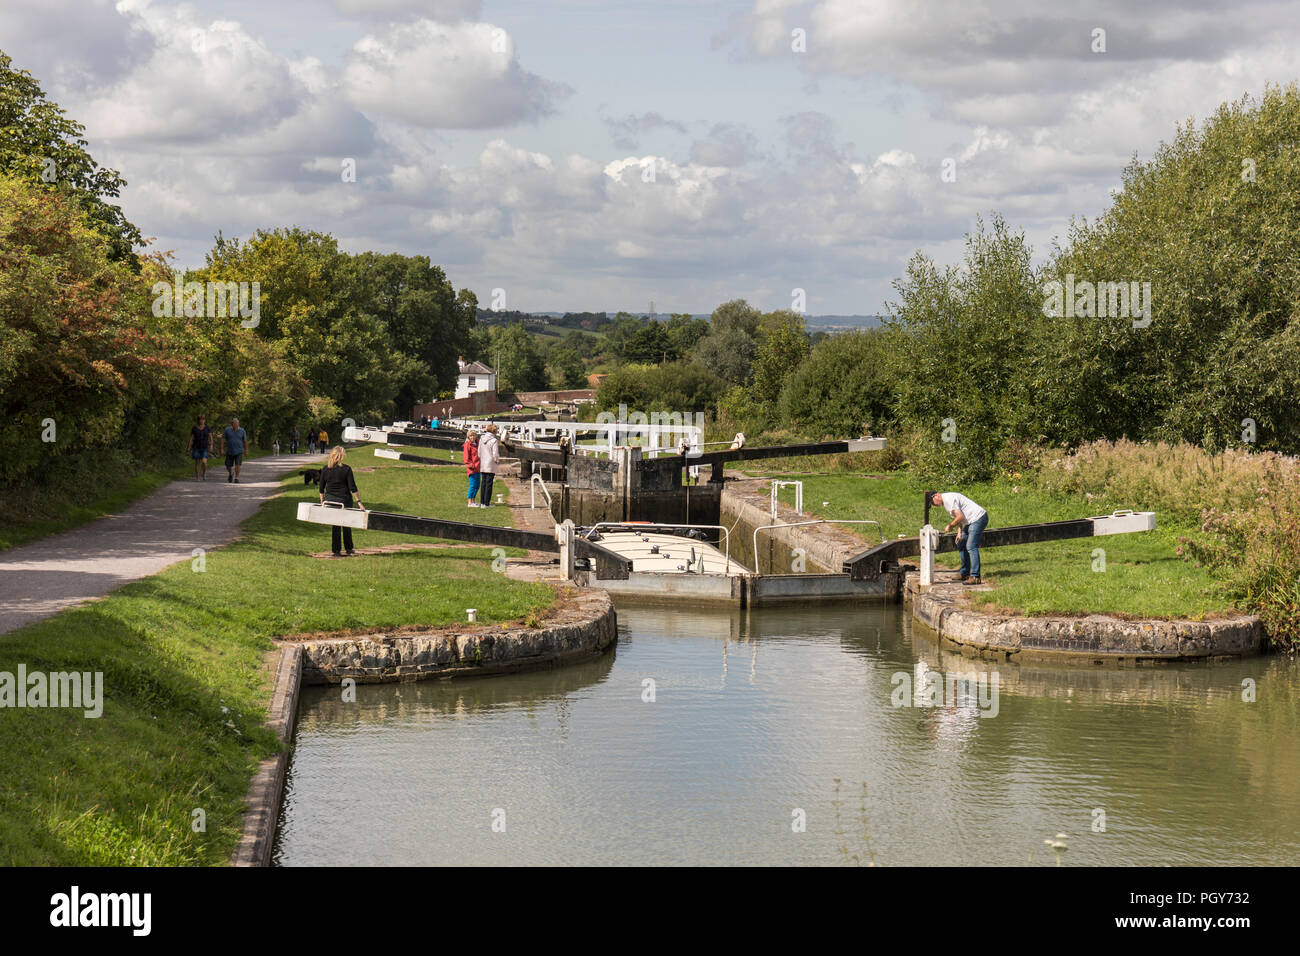 Canal boat at the lock gates on the Kennet and Avon canal, Caen Hill locks, Devizes, Wiltshire, England, UK, Stock Photo